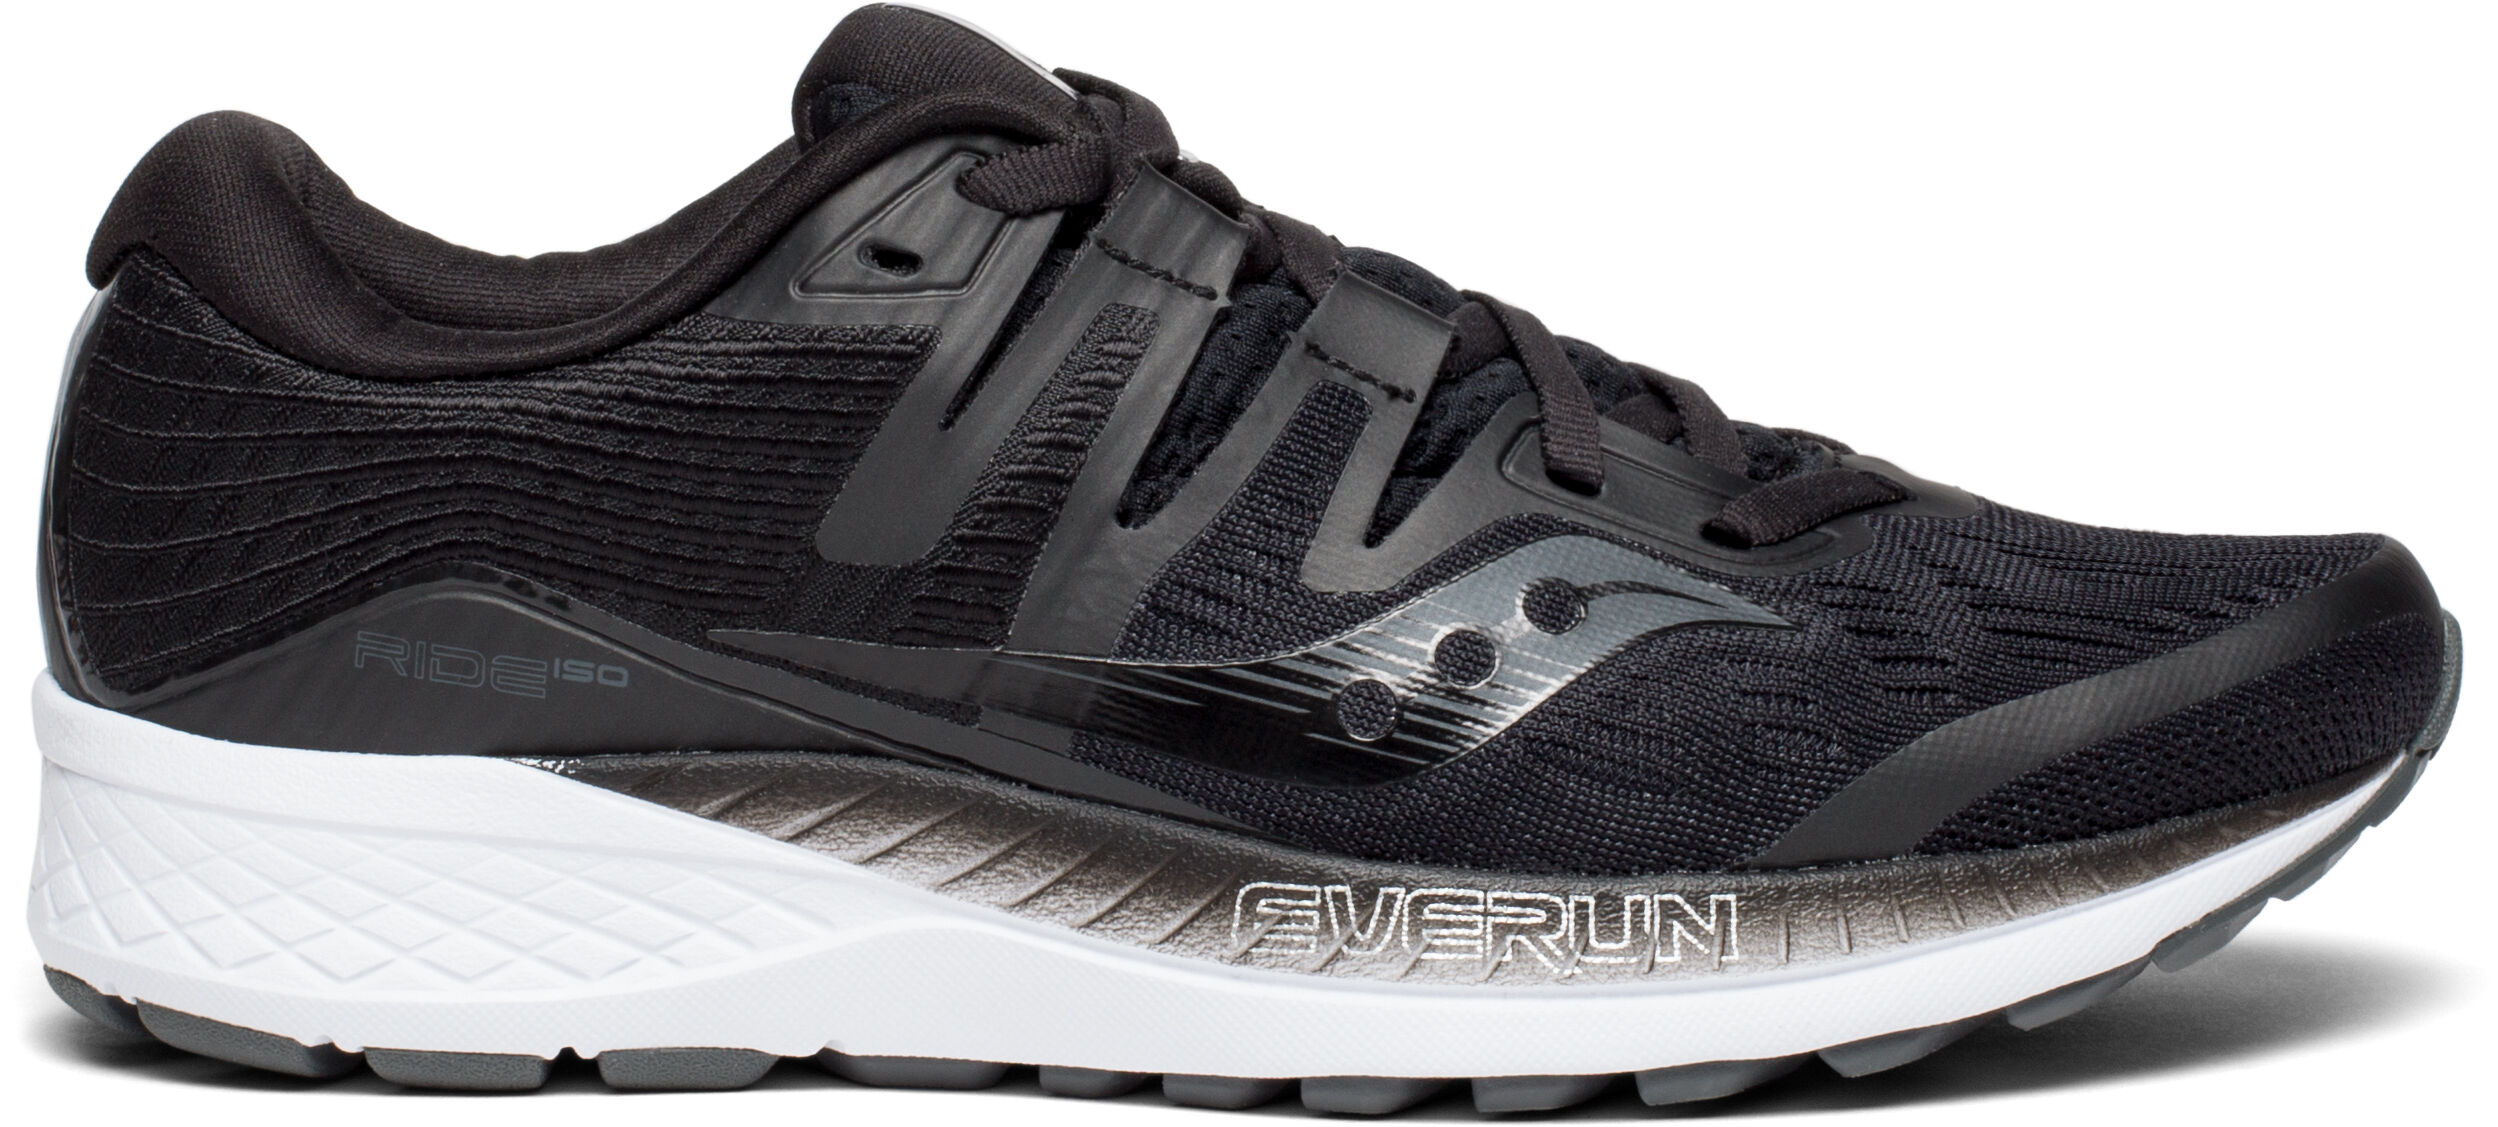 Saucony - Ride Iso - Running shoes - Women's